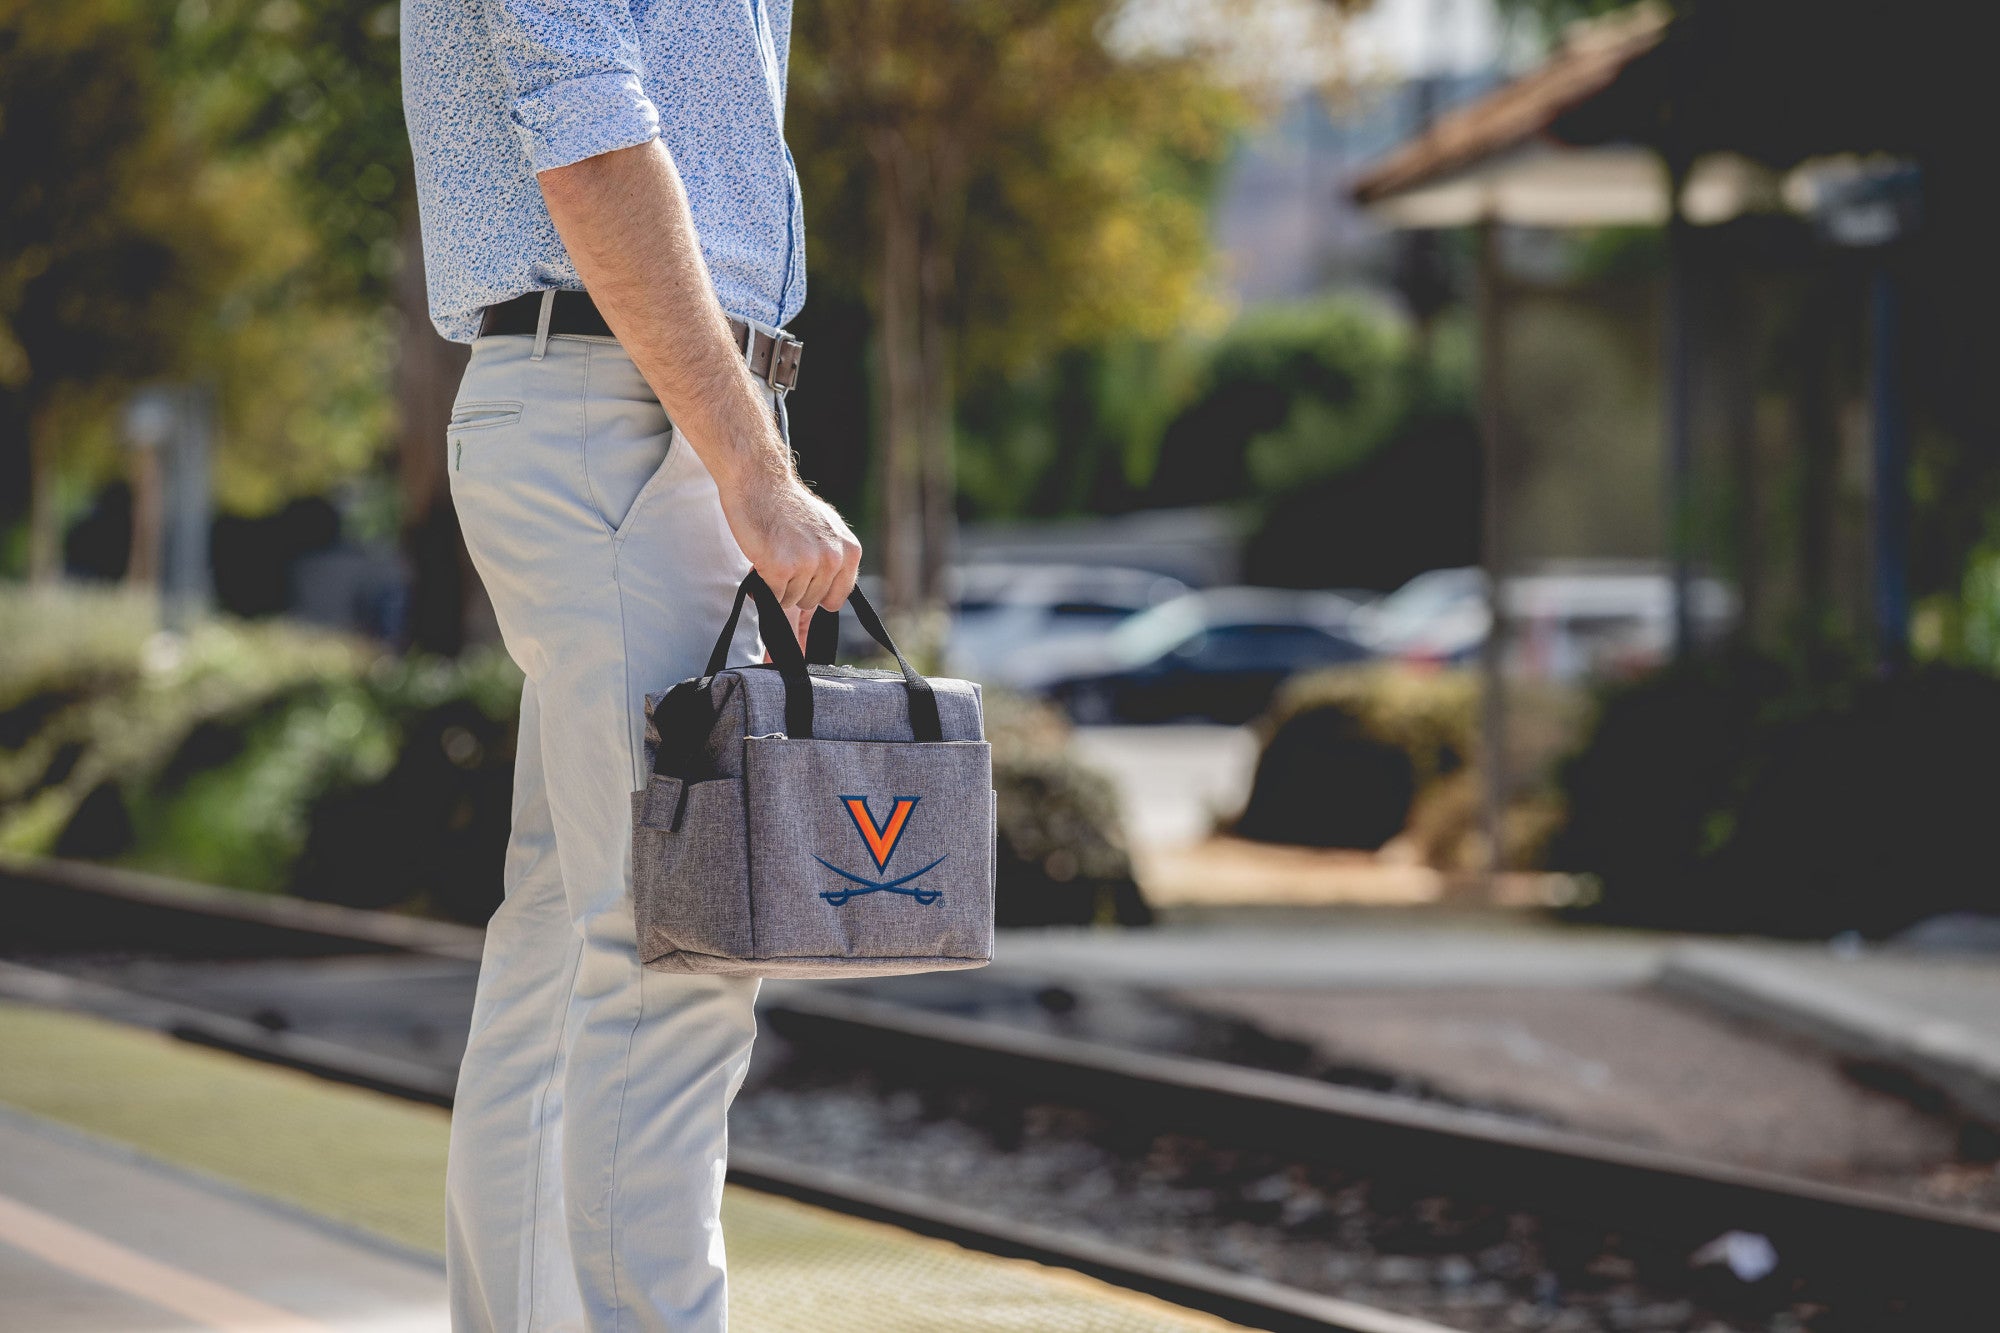 Virginia Cavaliers - On The Go Lunch Bag Cooler